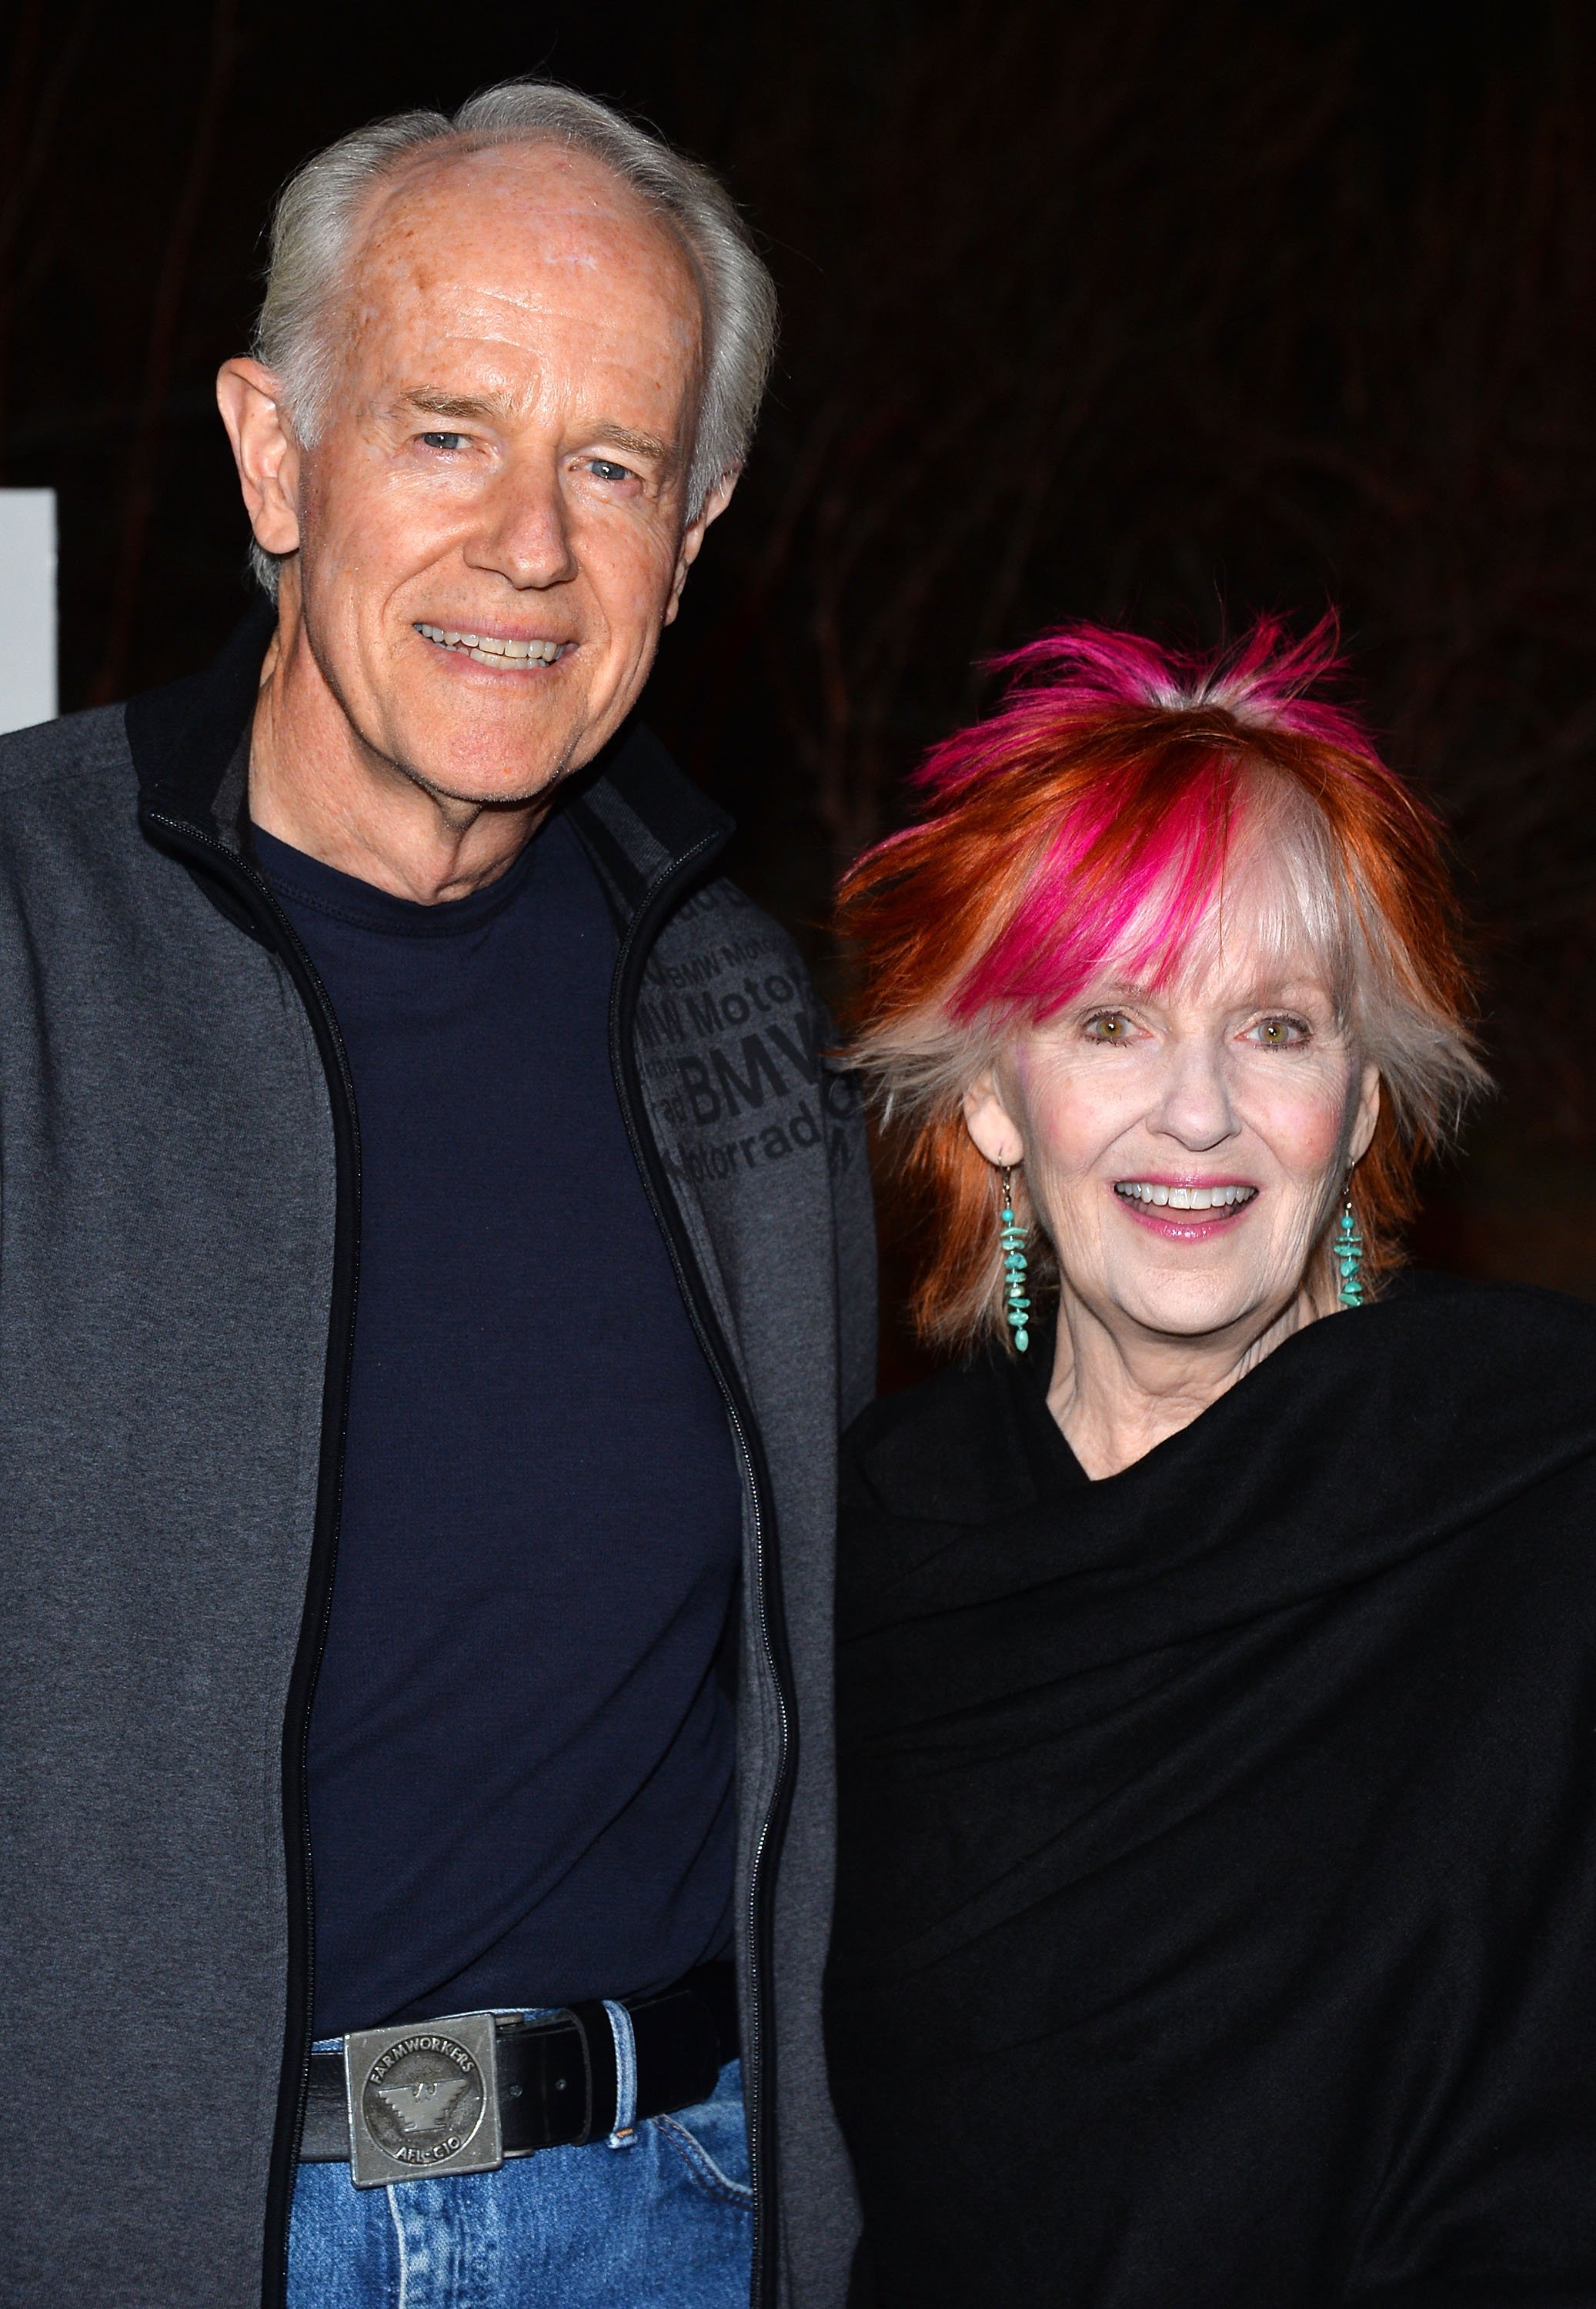 Mike Farrell and his wife Shelley Fabares arrive at the Sundance Channel's premiere screening of their new series "The Red Road" at The Bronson Caves at Griffith Park on February 24, 2014 in Los Angeles, California ┃Source: Getty Images